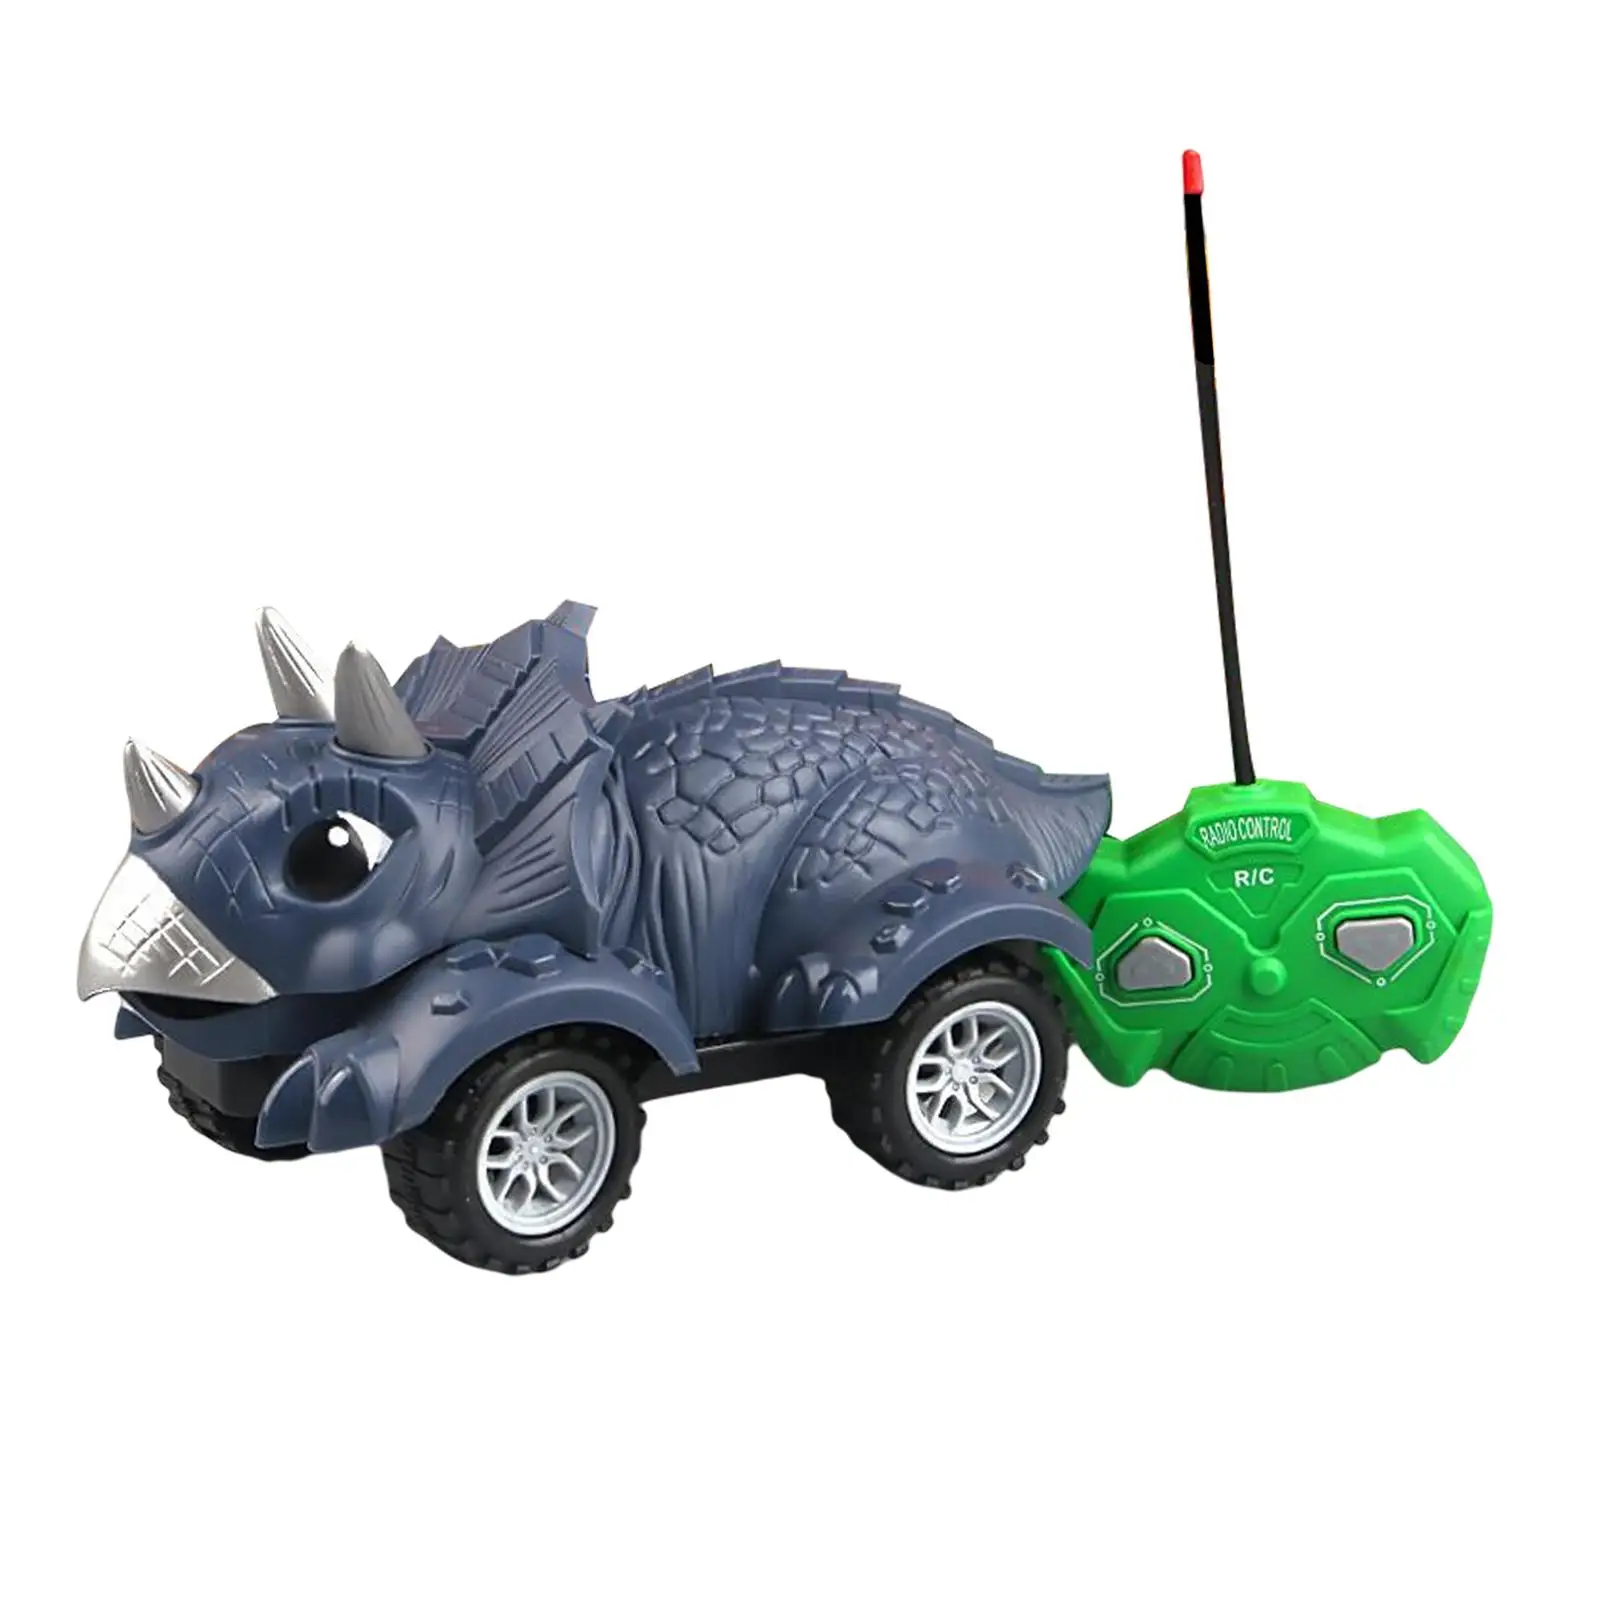 Fun Dinosaur Toy Car Learning Educational Toys Battery Operated Toy Vehicle Toy Car for Christmas Gifts Party Favors Boys Kids